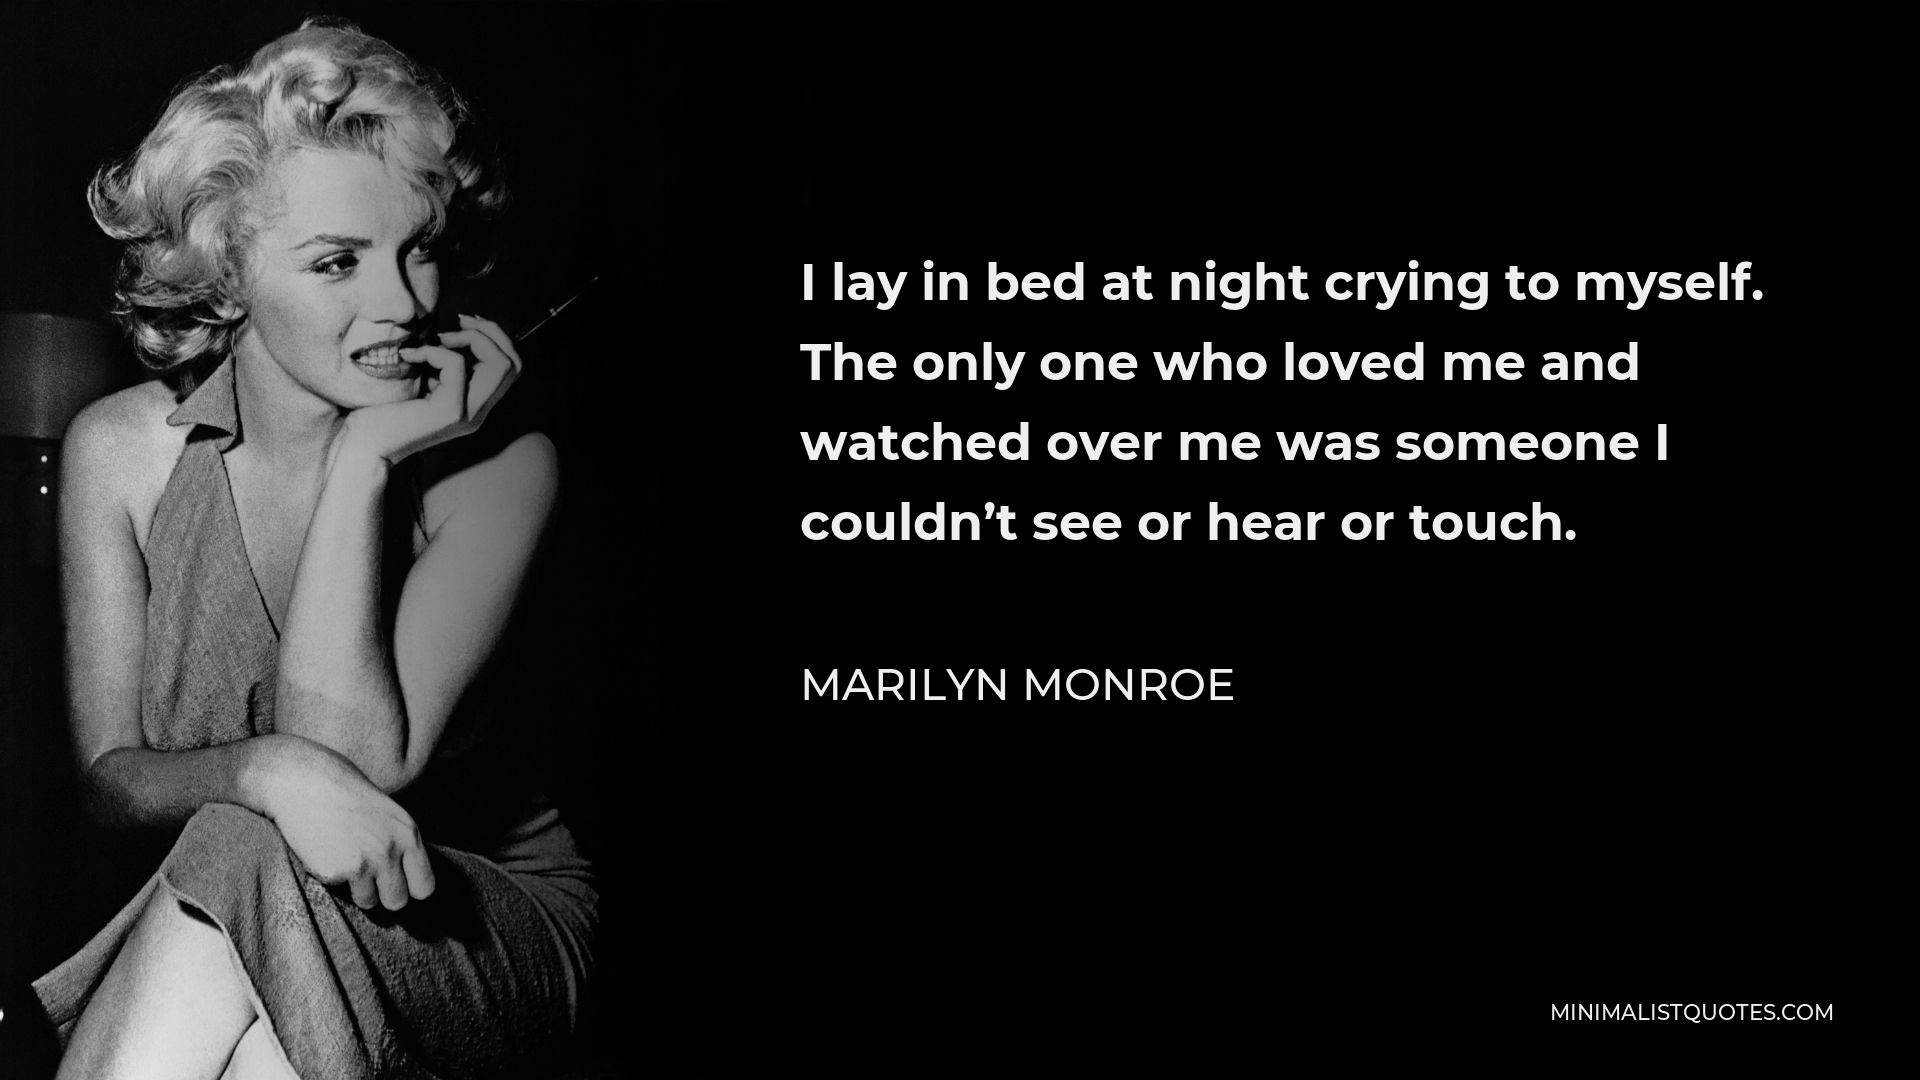 Marilyn Monroe Quote - I lay in bed at night crying to myself. The only one who loved me and watched over me was someone I couldn’t see or hear or touch.